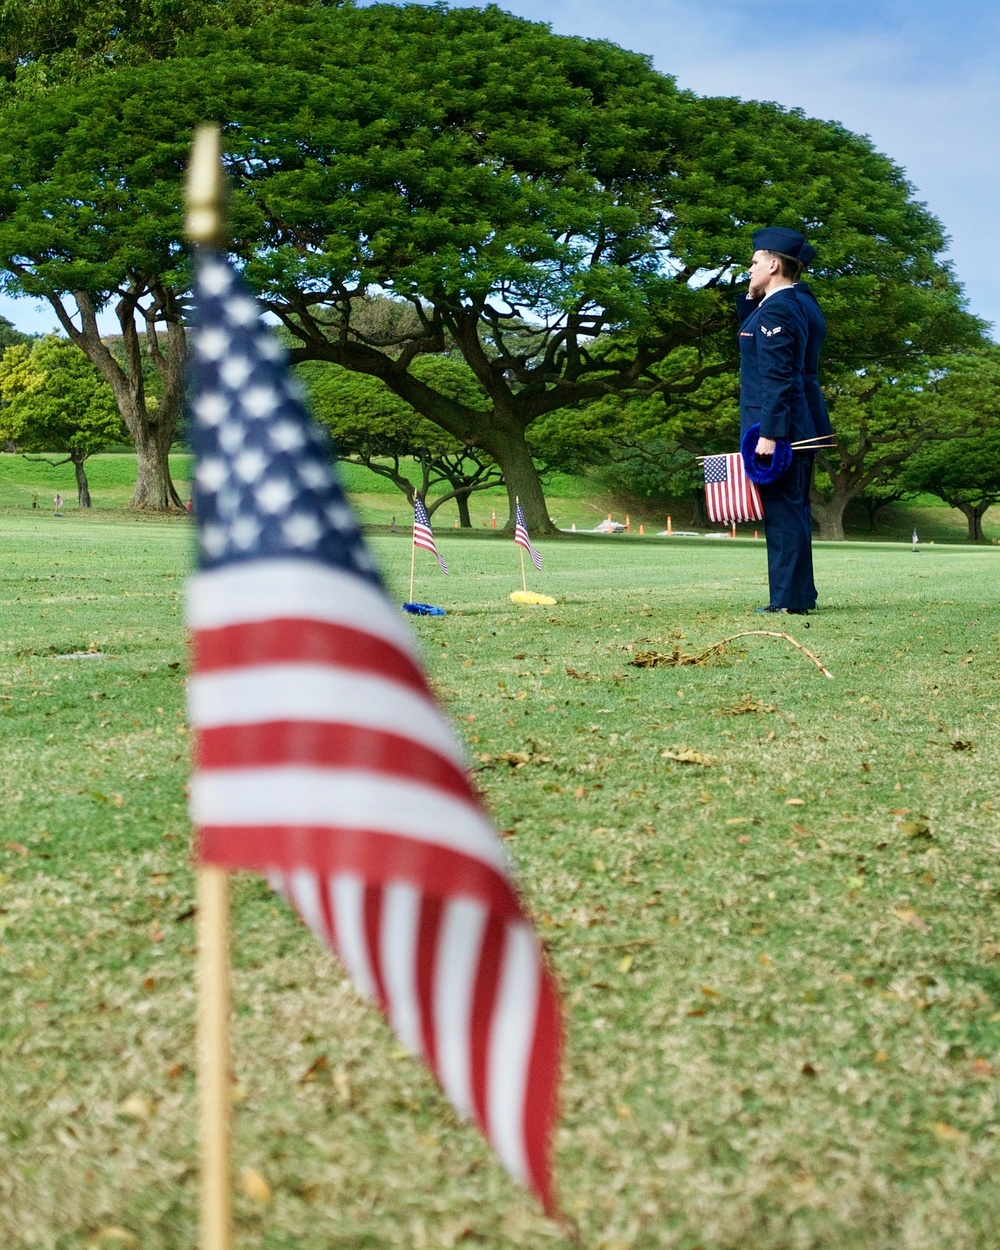 U.S. servicemembers remember those who fell during Pearl Harbor attack in 1941